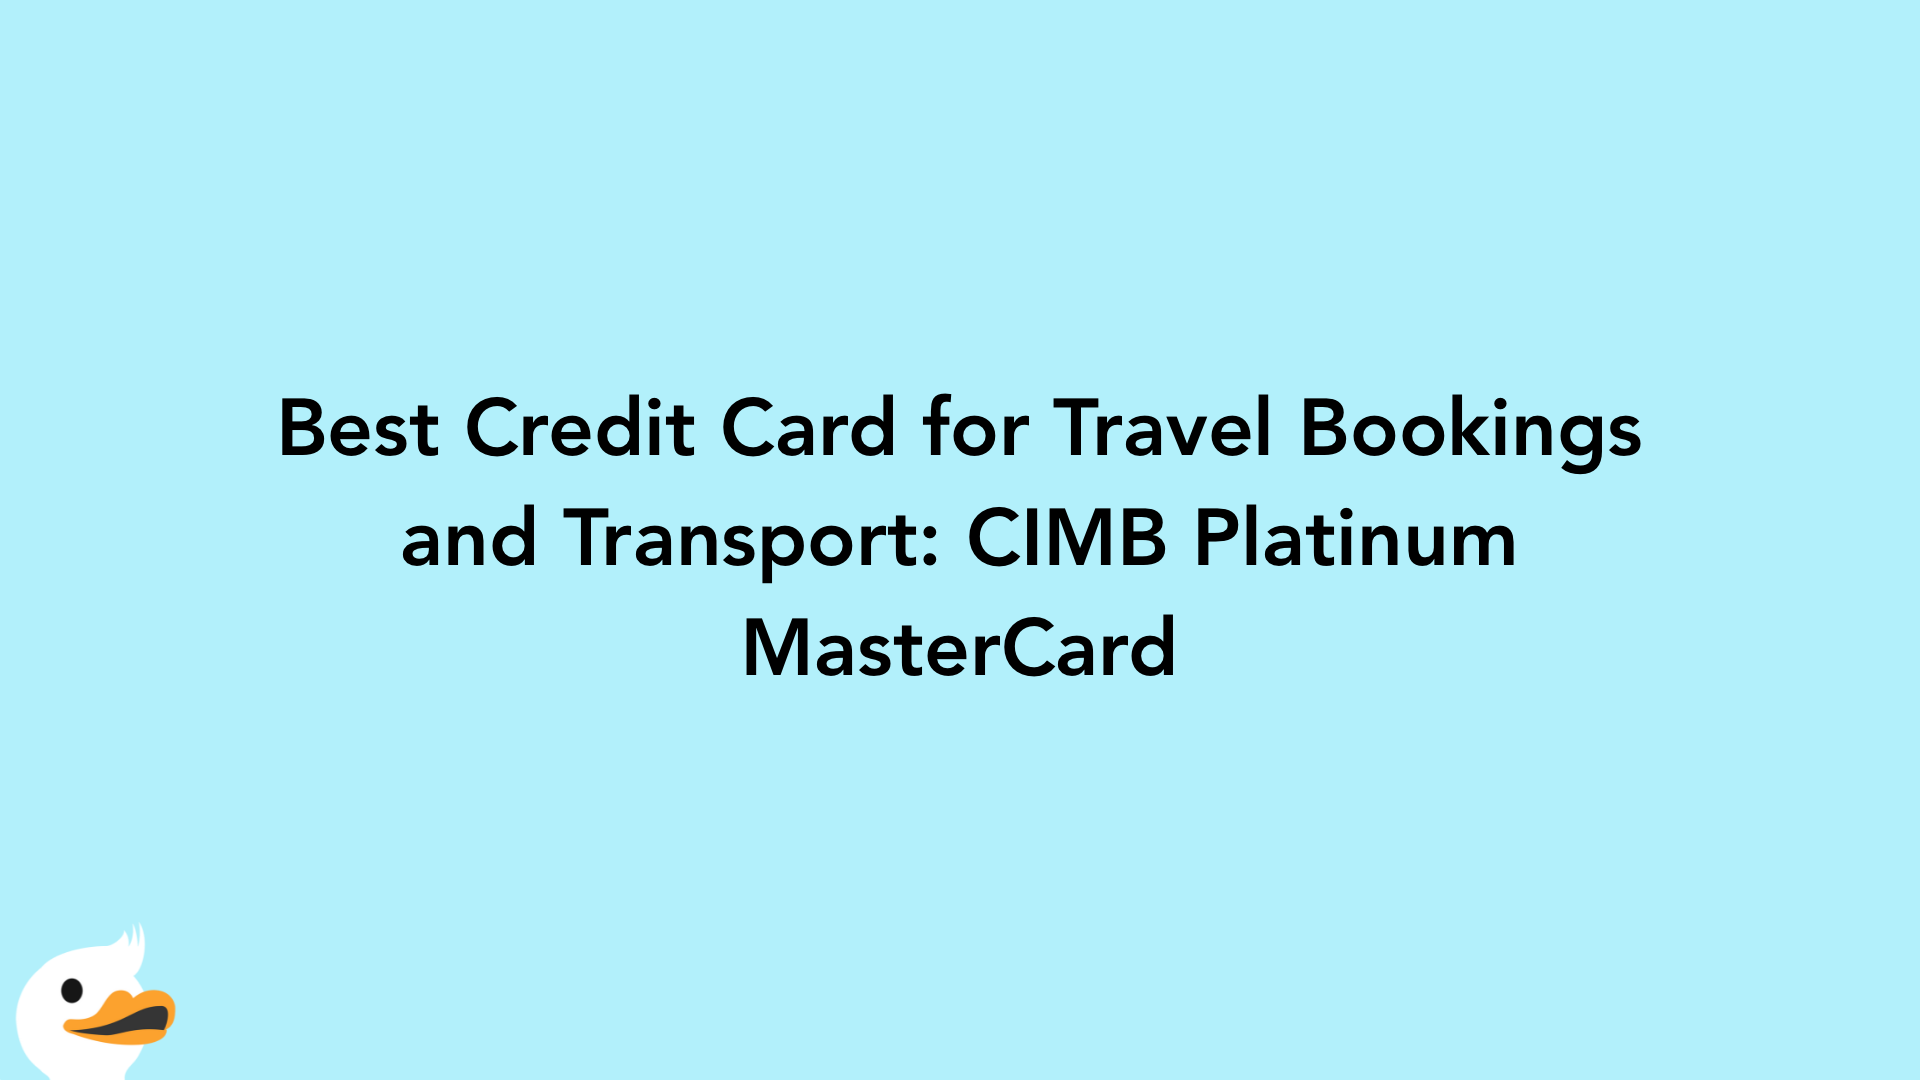 Best Credit Card for Travel Bookings and Transport: CIMB Platinum MasterCard